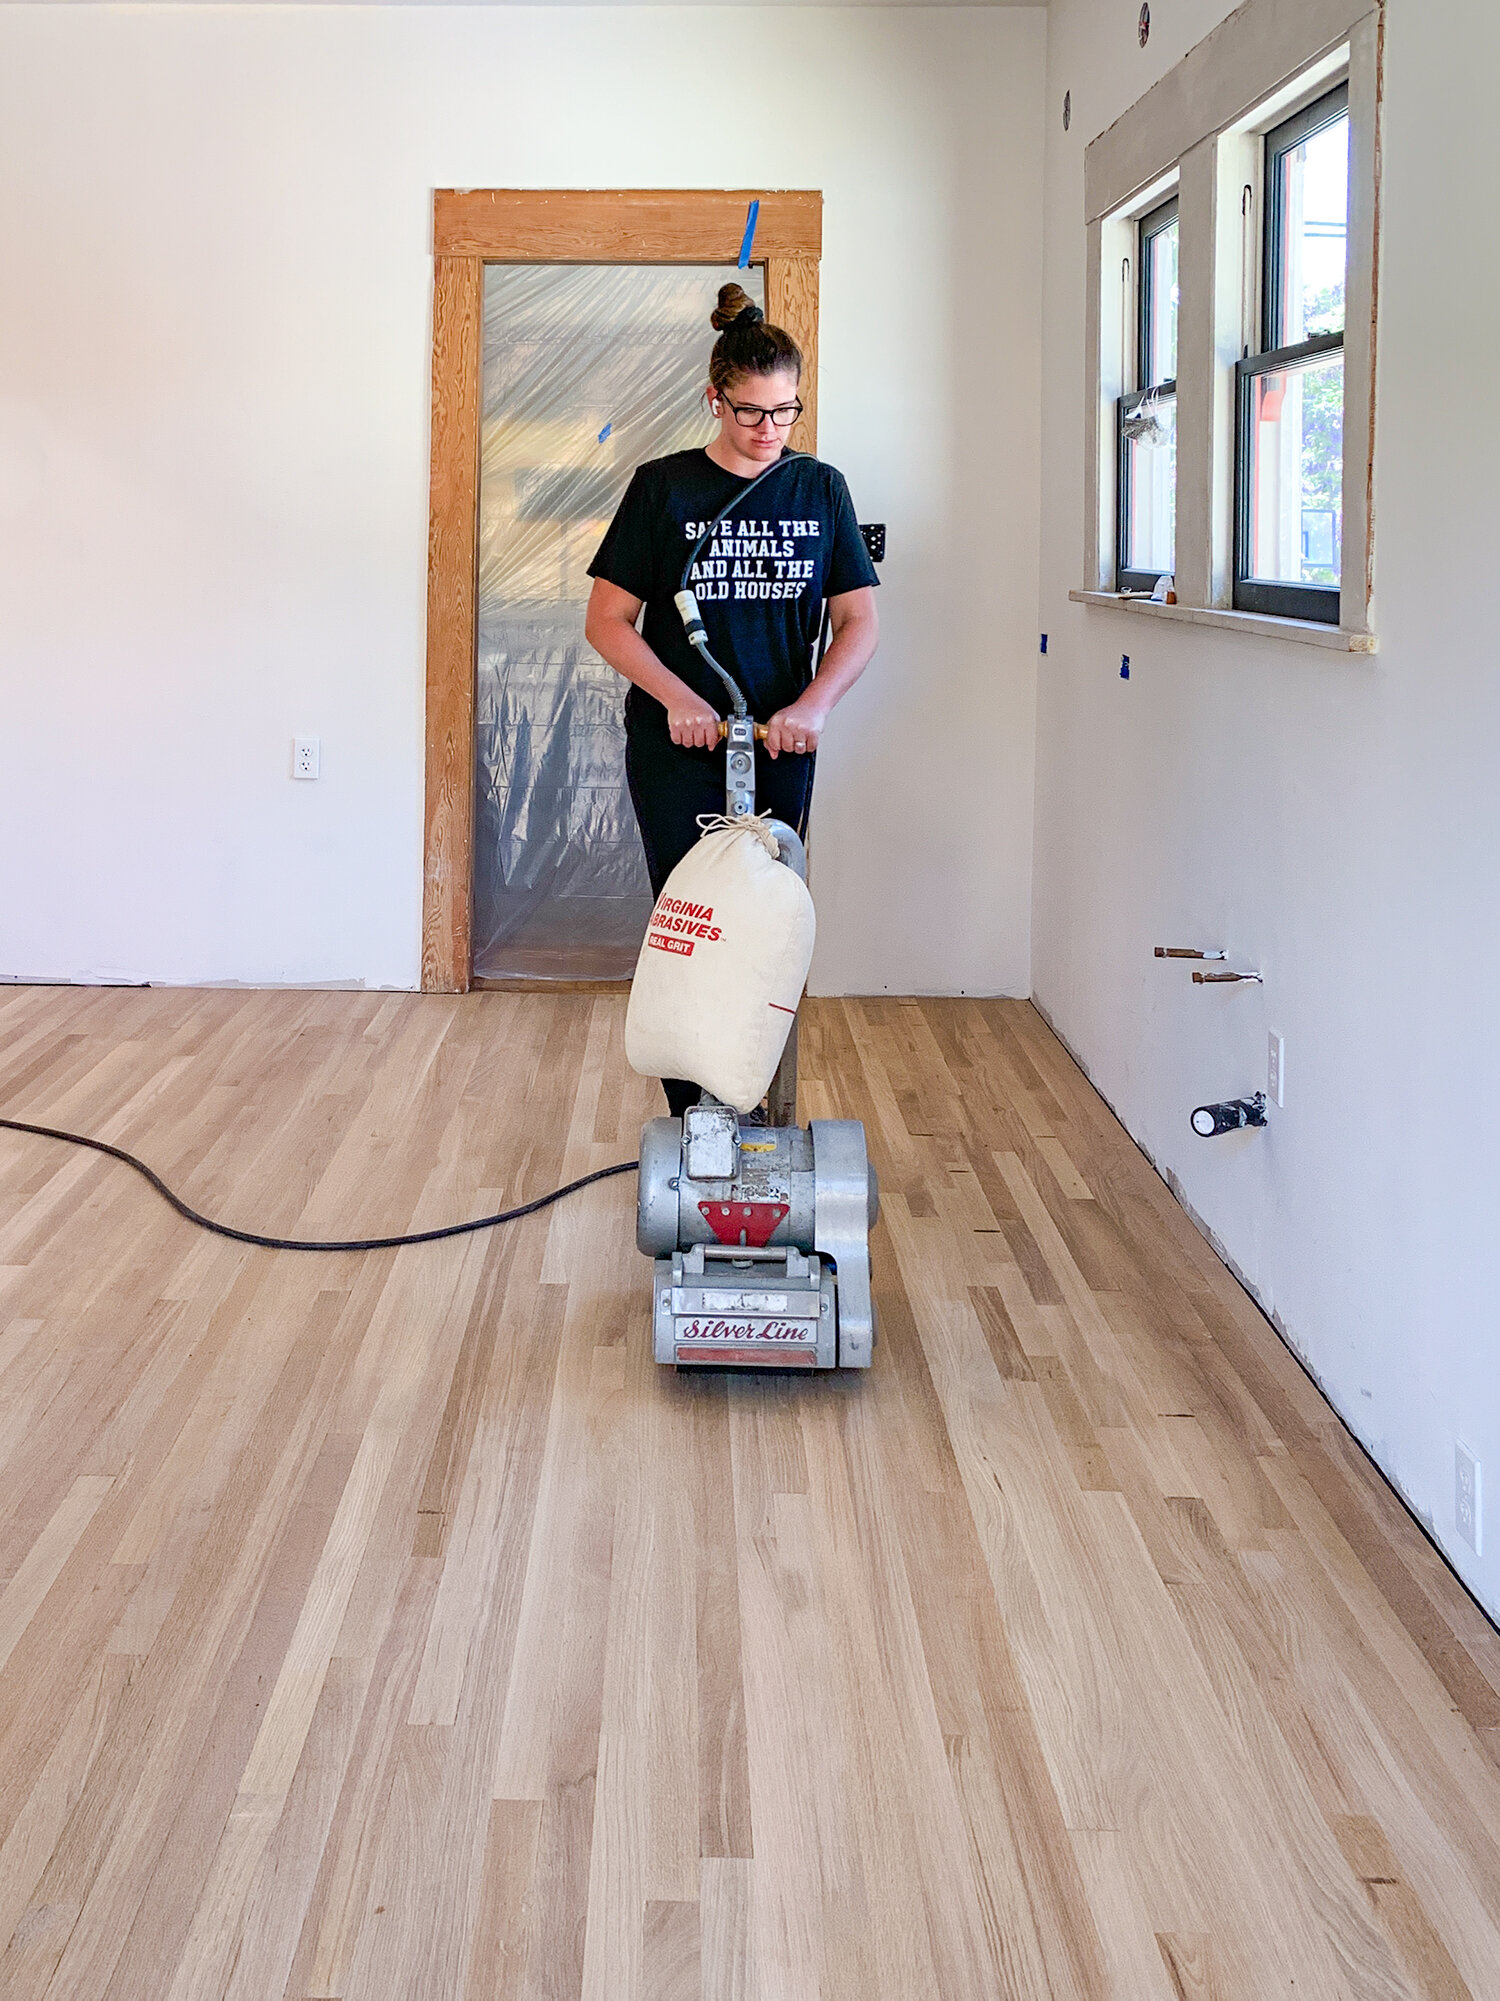 We Hit A Snag And Had To Refinish Our, Diy Sand And Refinish Hardwood Floors